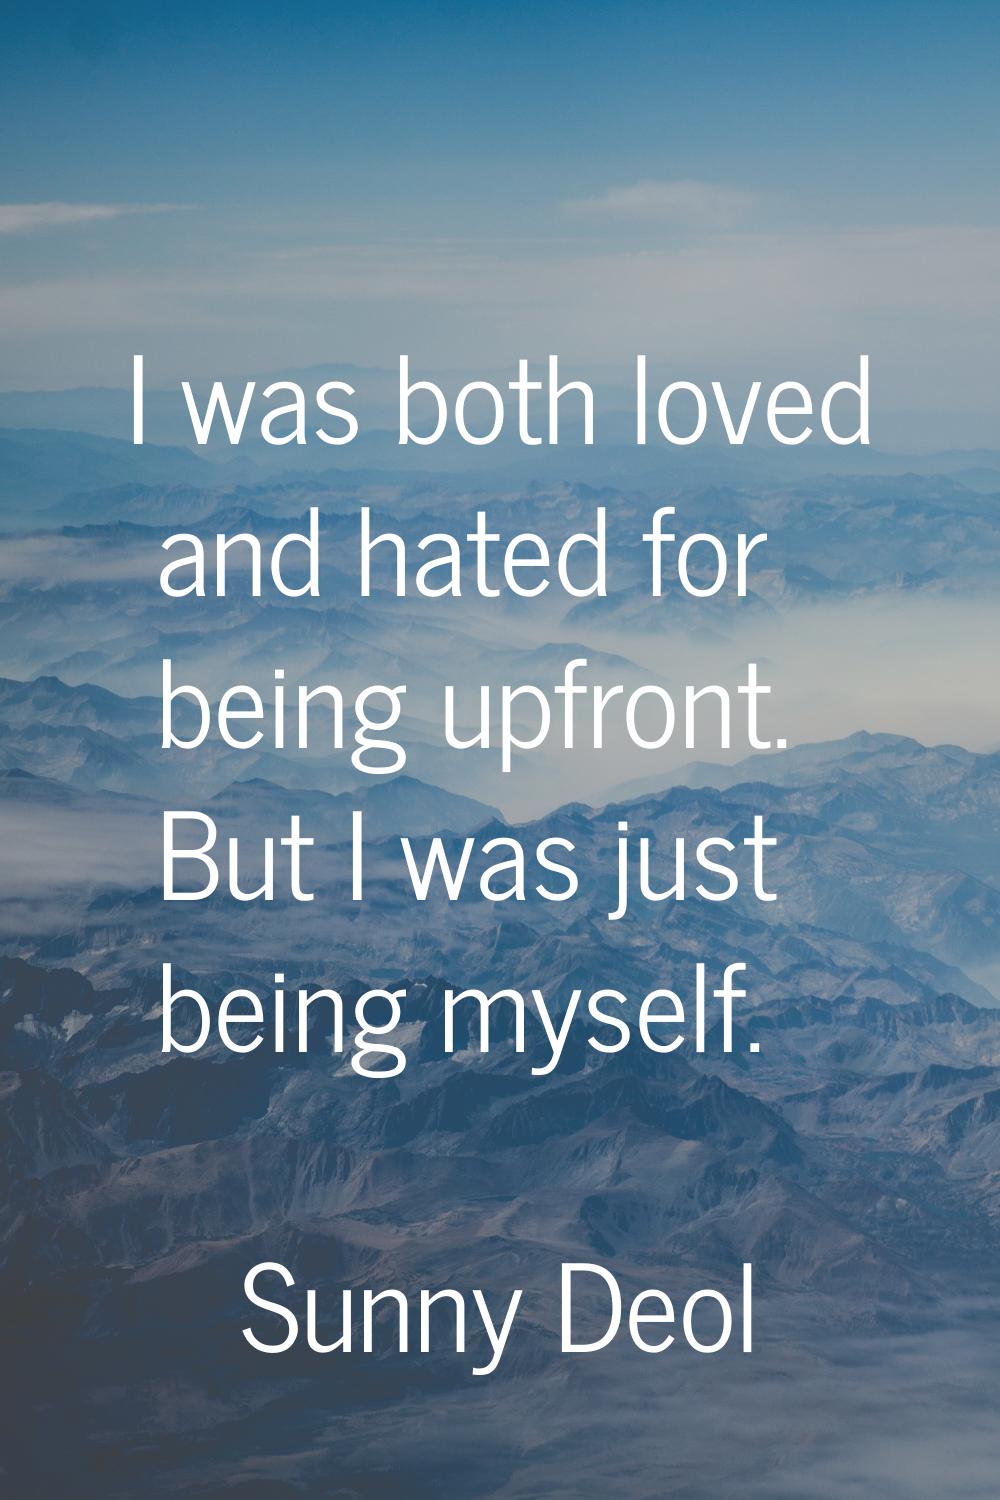 I was both loved and hated for being upfront. But I was just being myself.